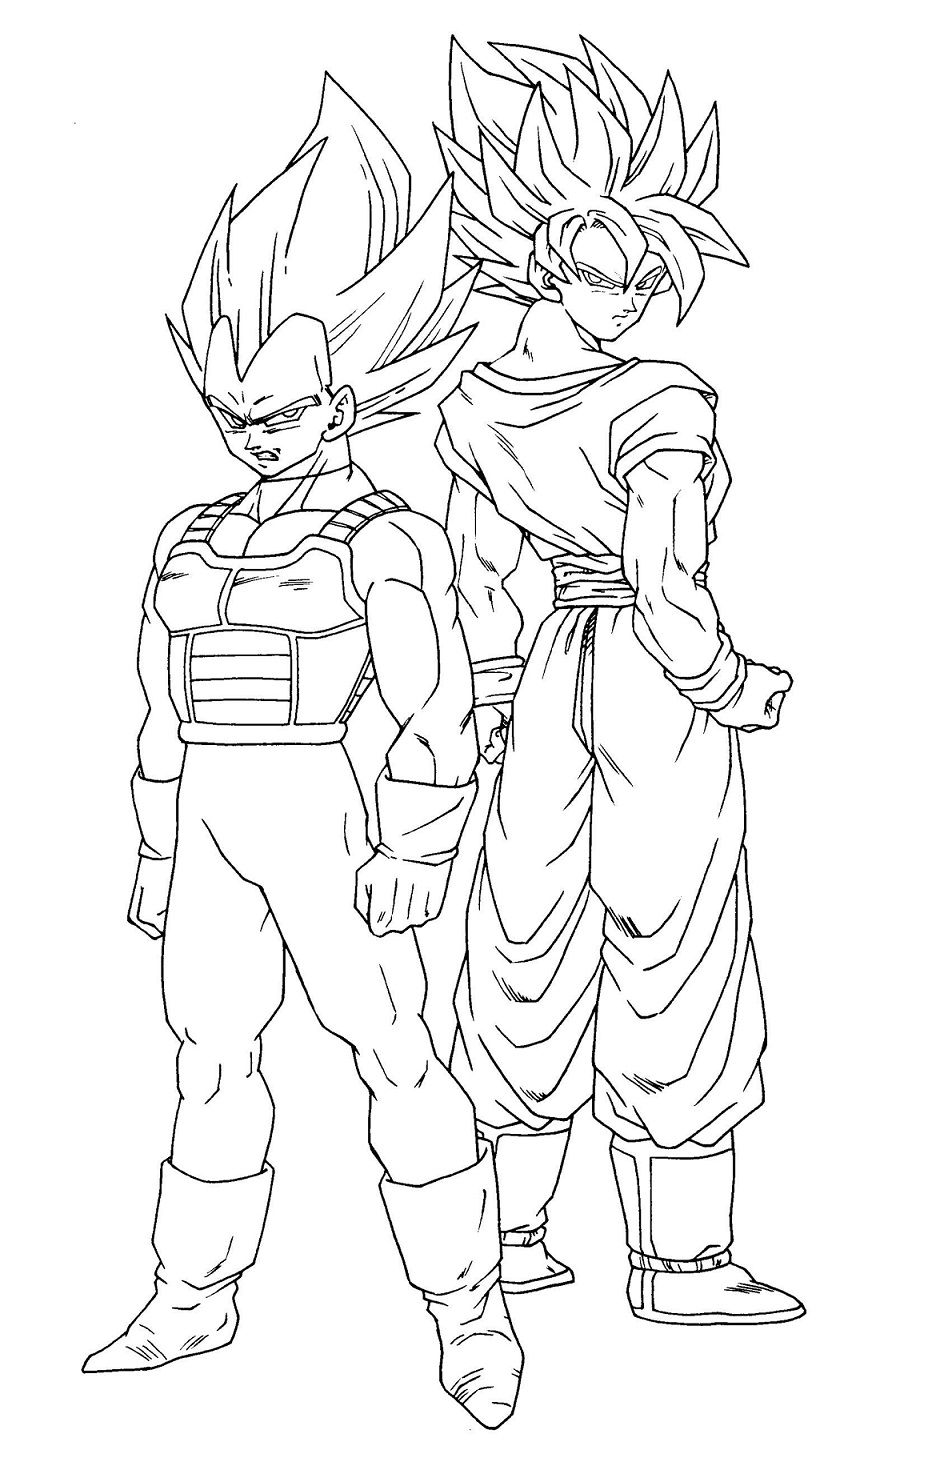 Awesome Goku And Vegeta Coloring Page - Free Printable Coloring Pages